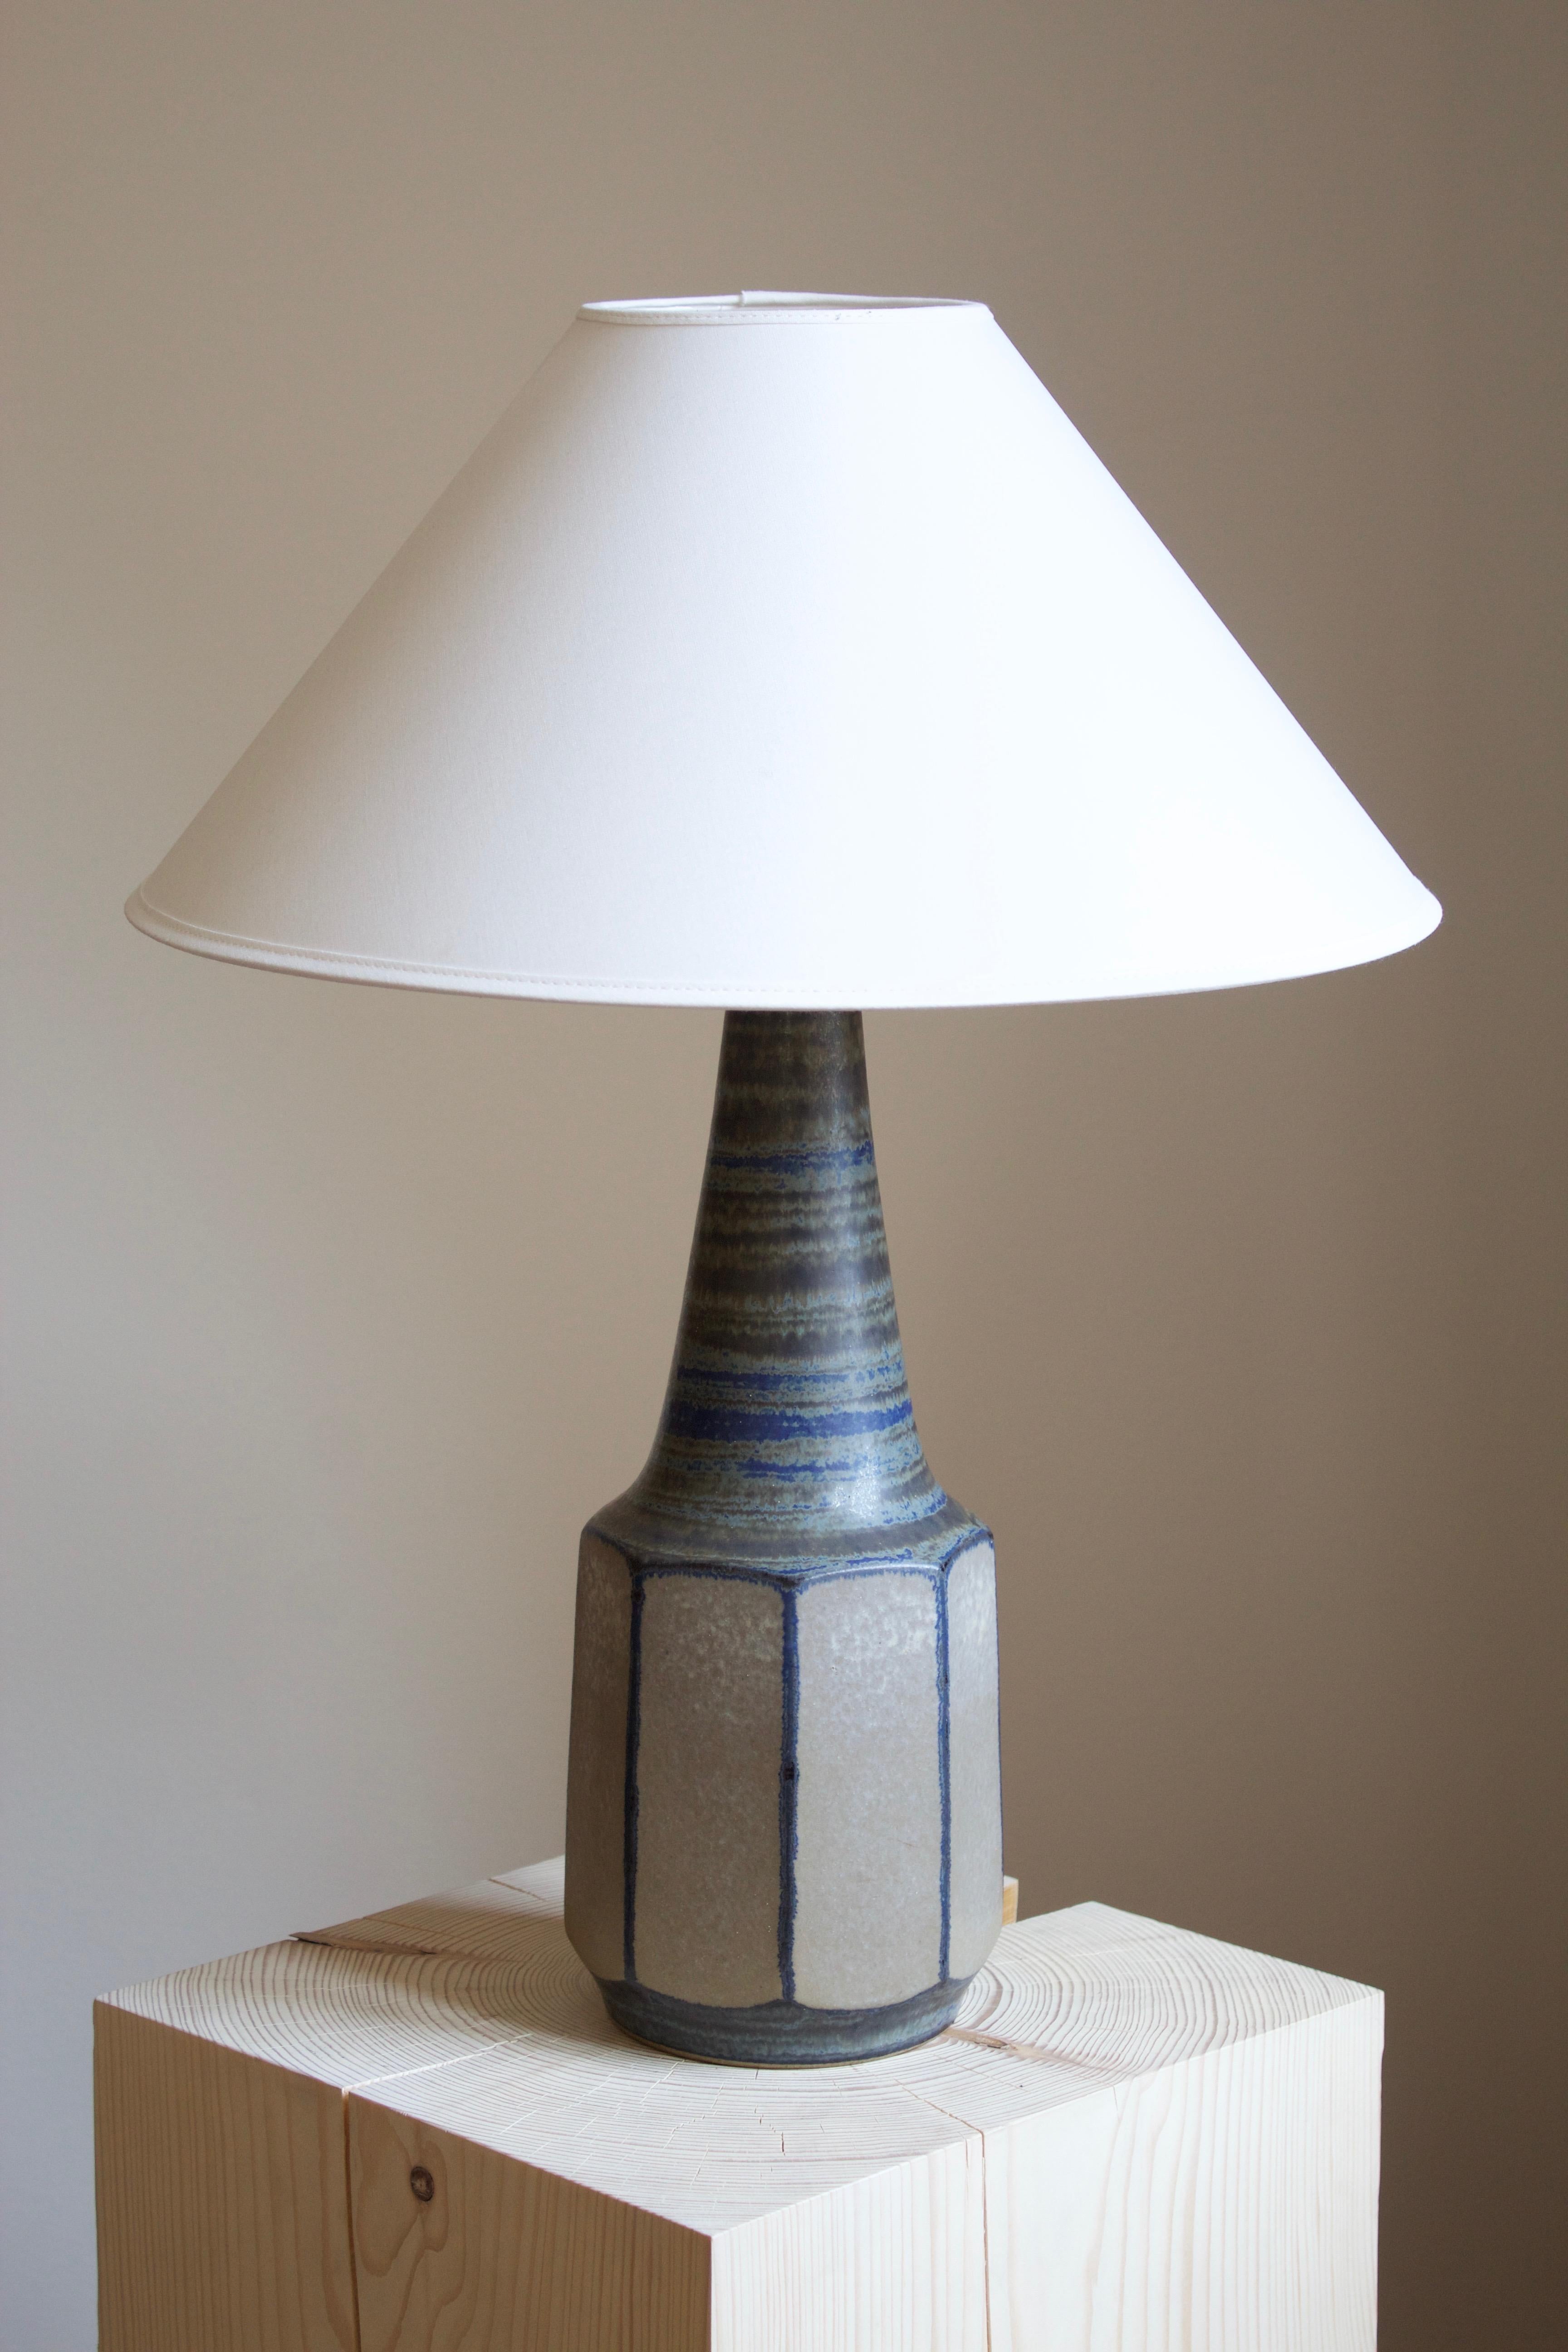 A table lamp designed by Marianne Starck produced by Michael Andersen Keramik. Handpainted.

Purchase excludes lampshade. Stated measurements excluding lampshade.

Glaze features grey-blue-brown colors.

Other ceramicists of the period include Axel